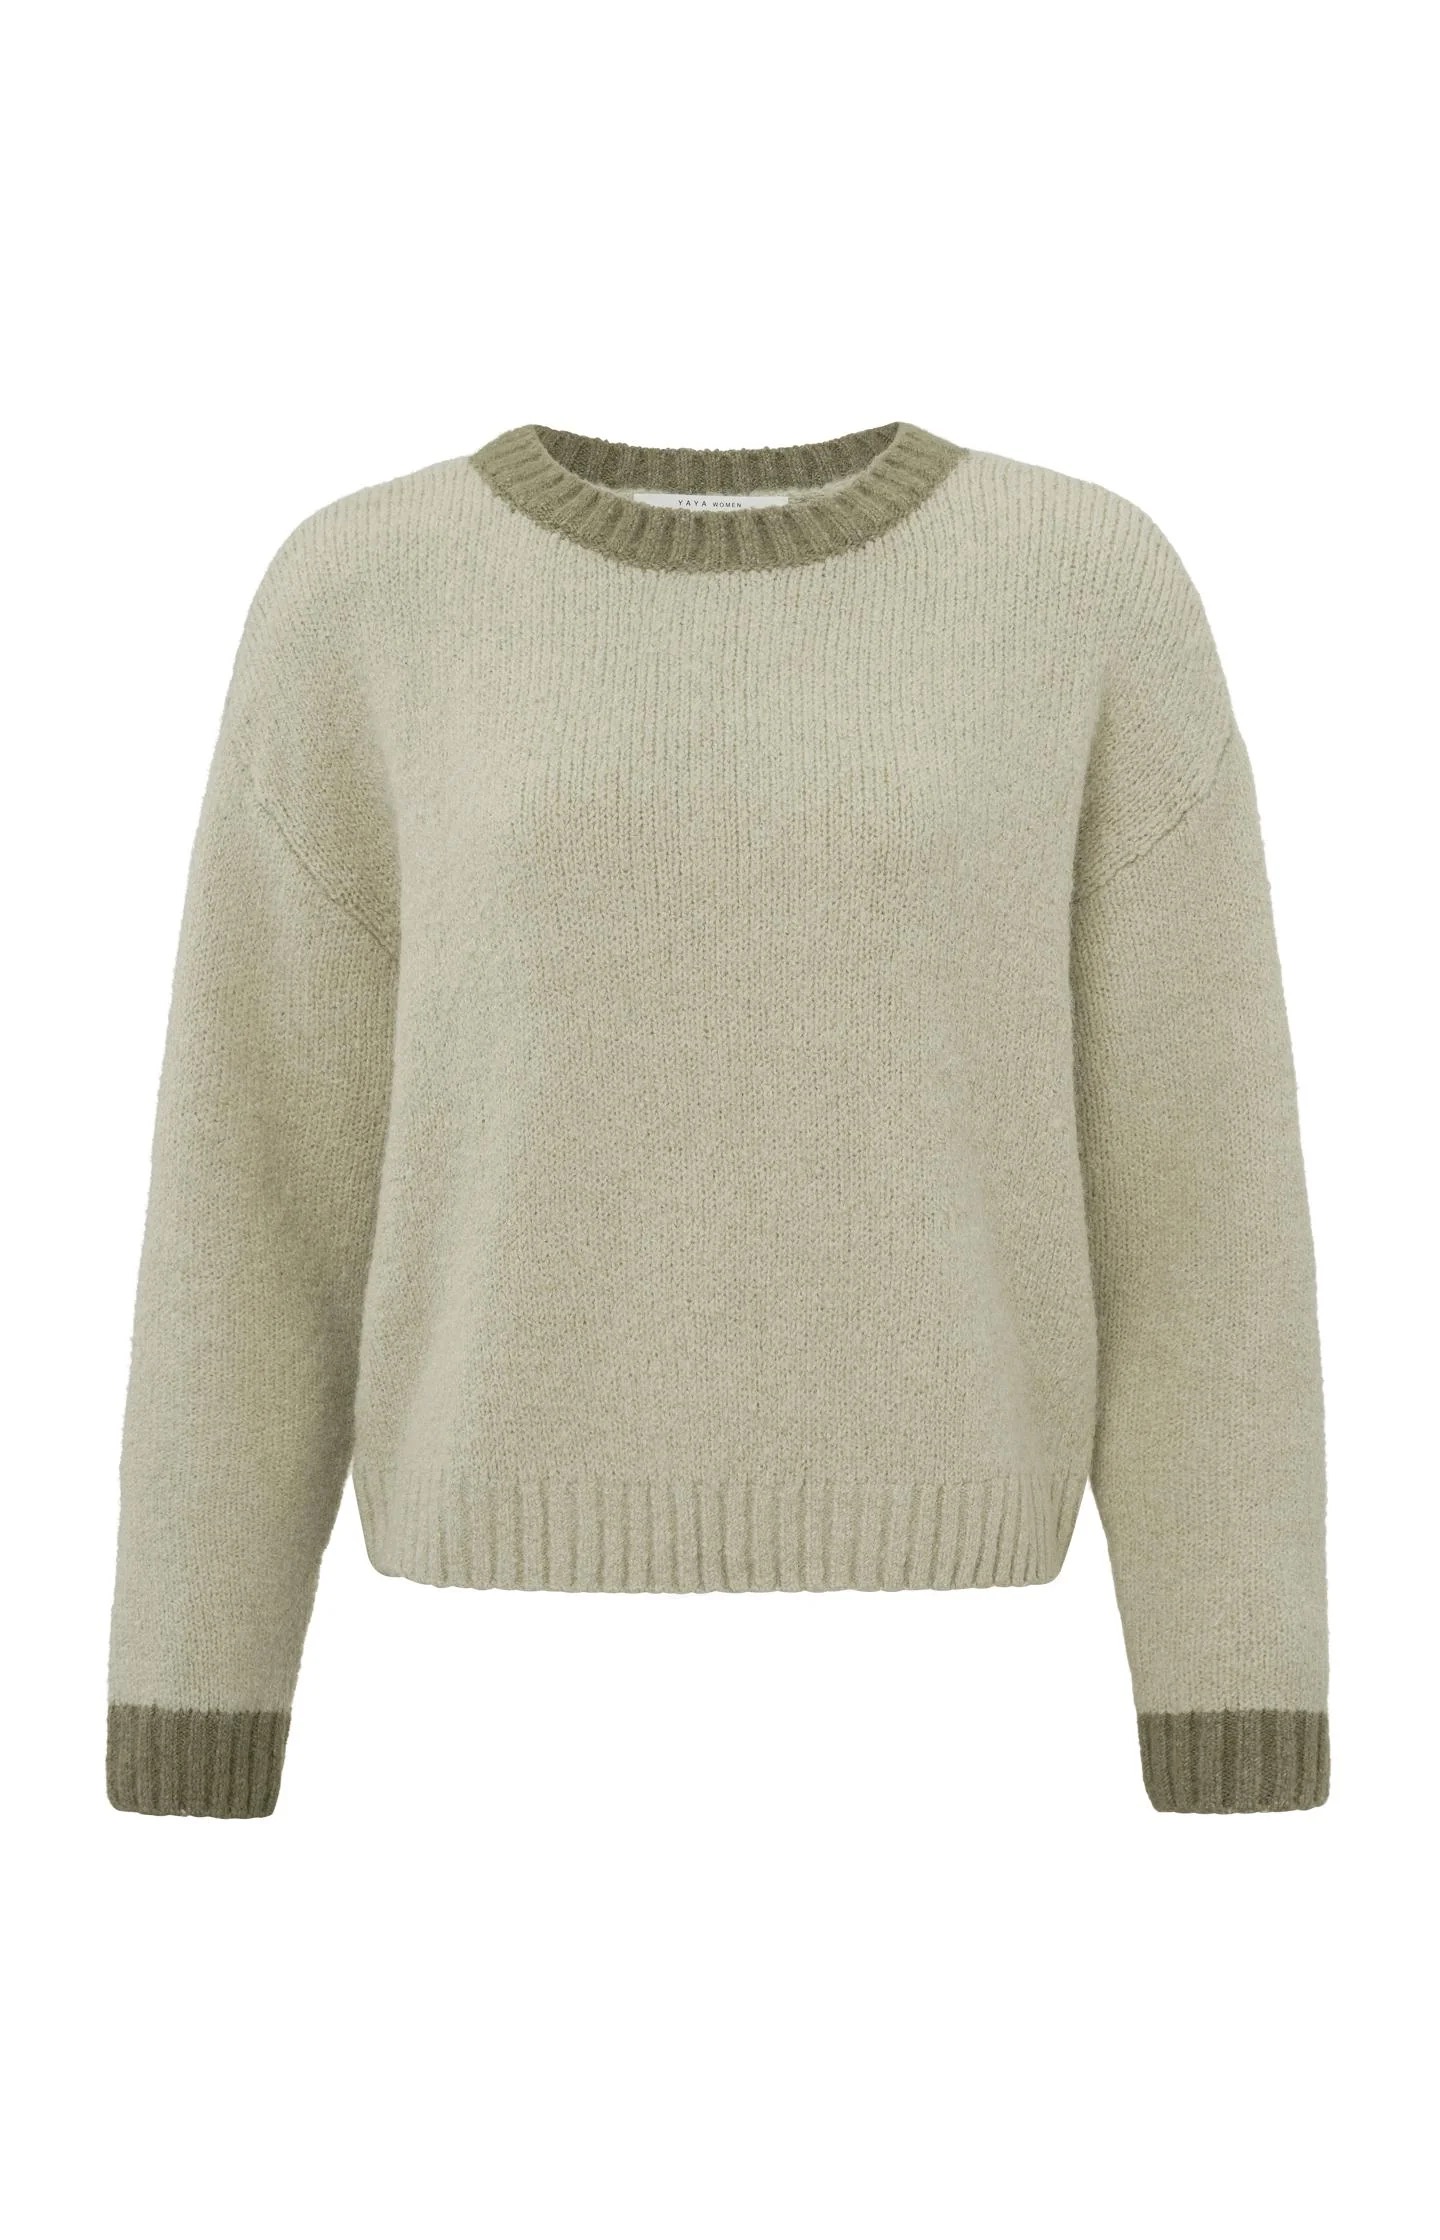 Yaya Sweater With Round Neck, Long Sleeves And Dropped Shoulders - Silver Lining Beige